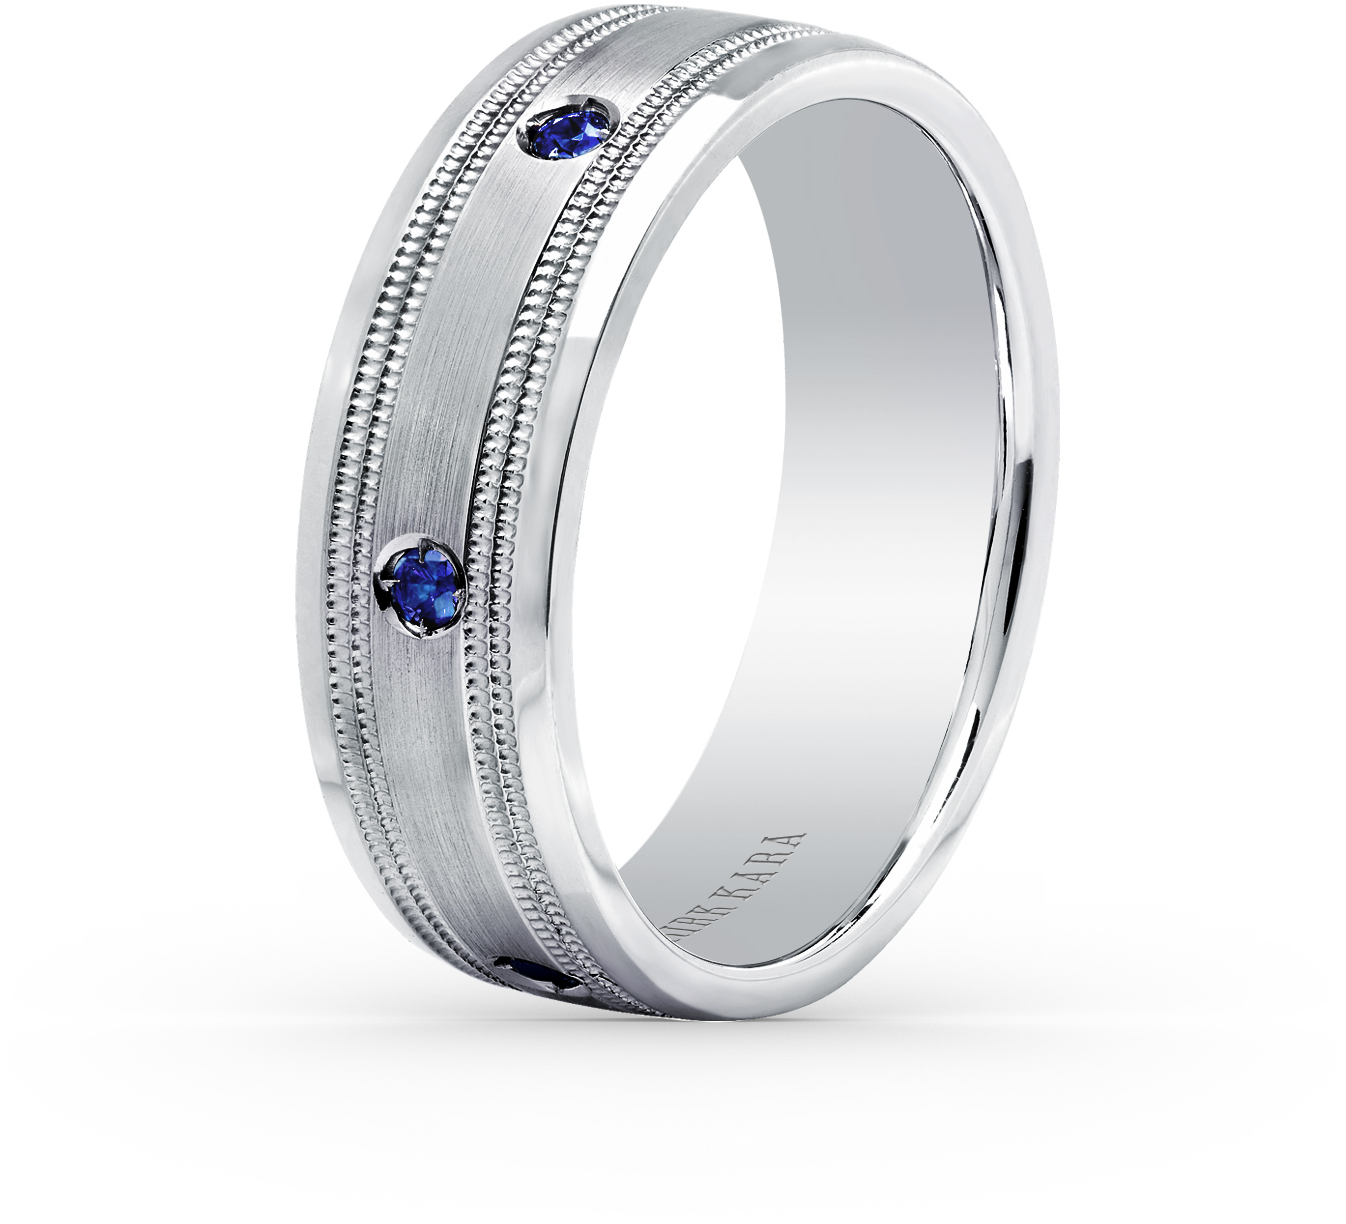 Man's wedding band in white gold with blue sapphires